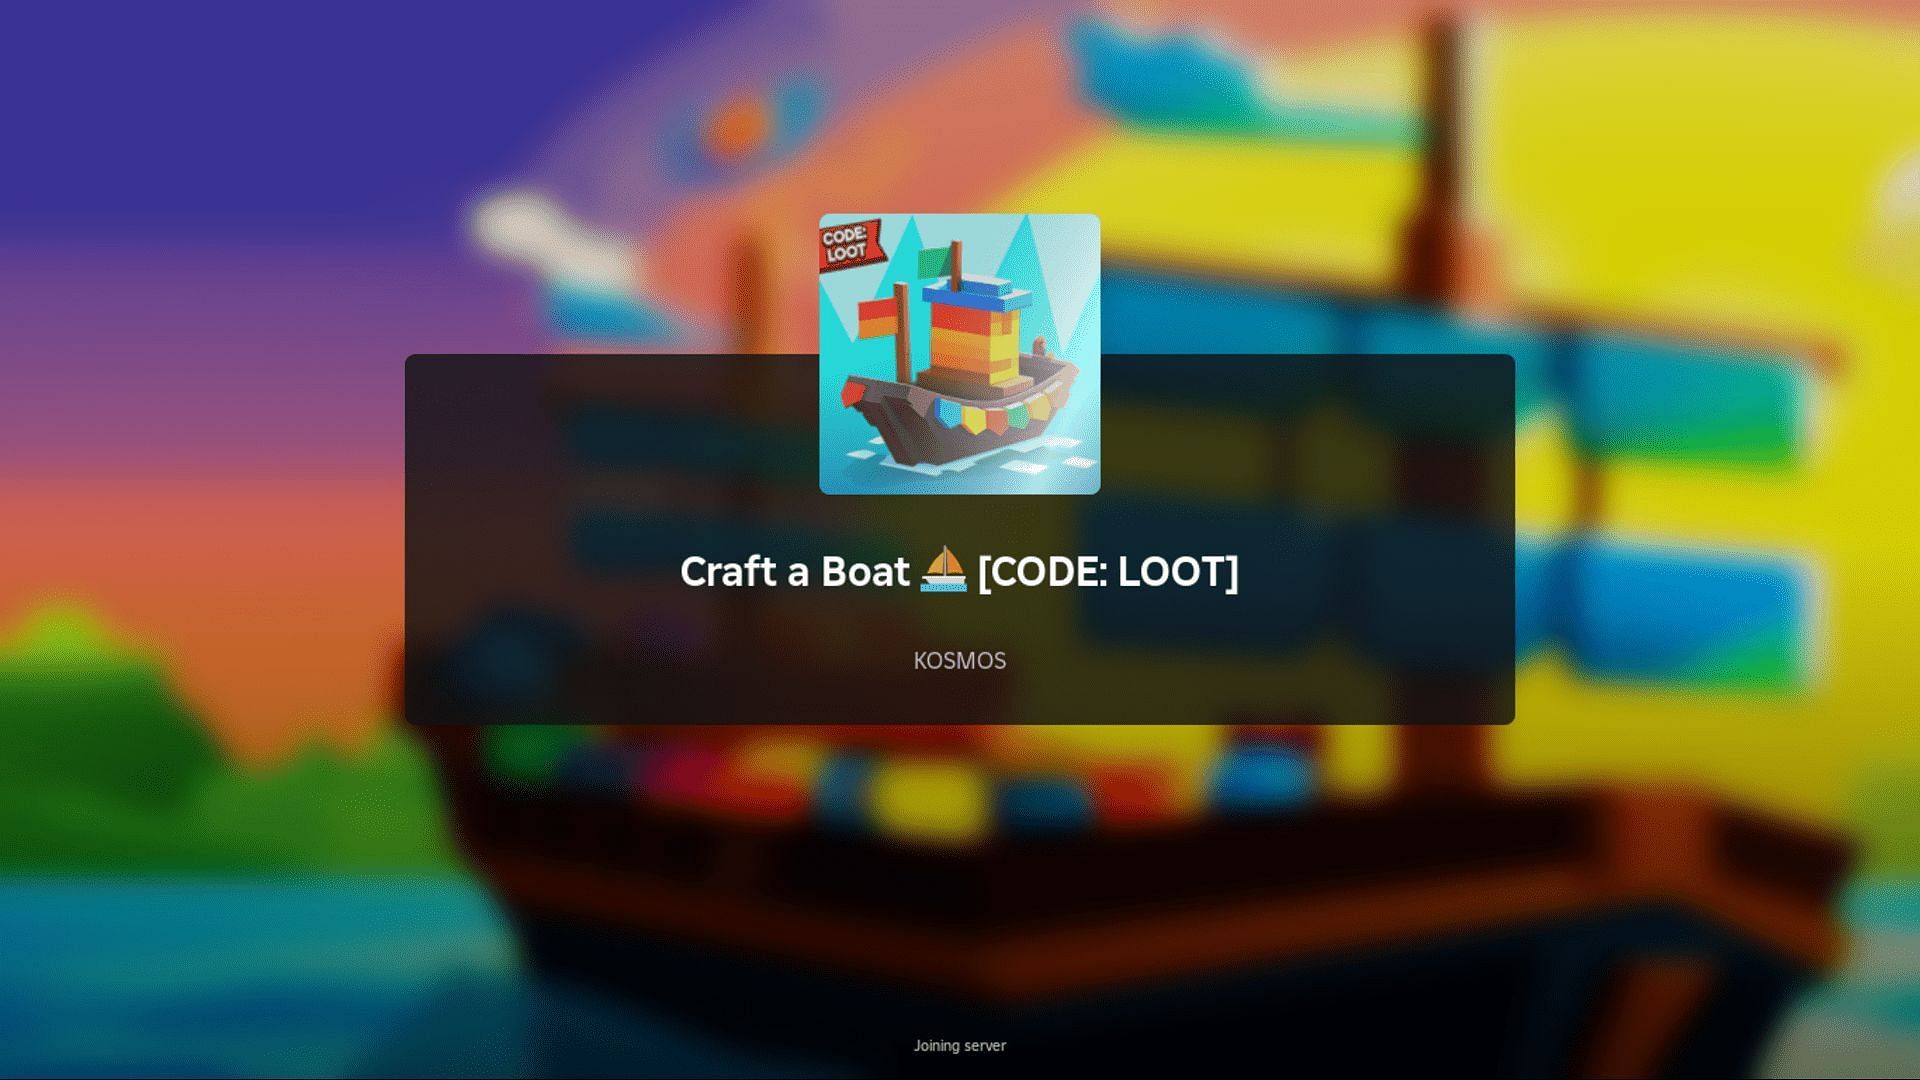 Craft a Boat codes